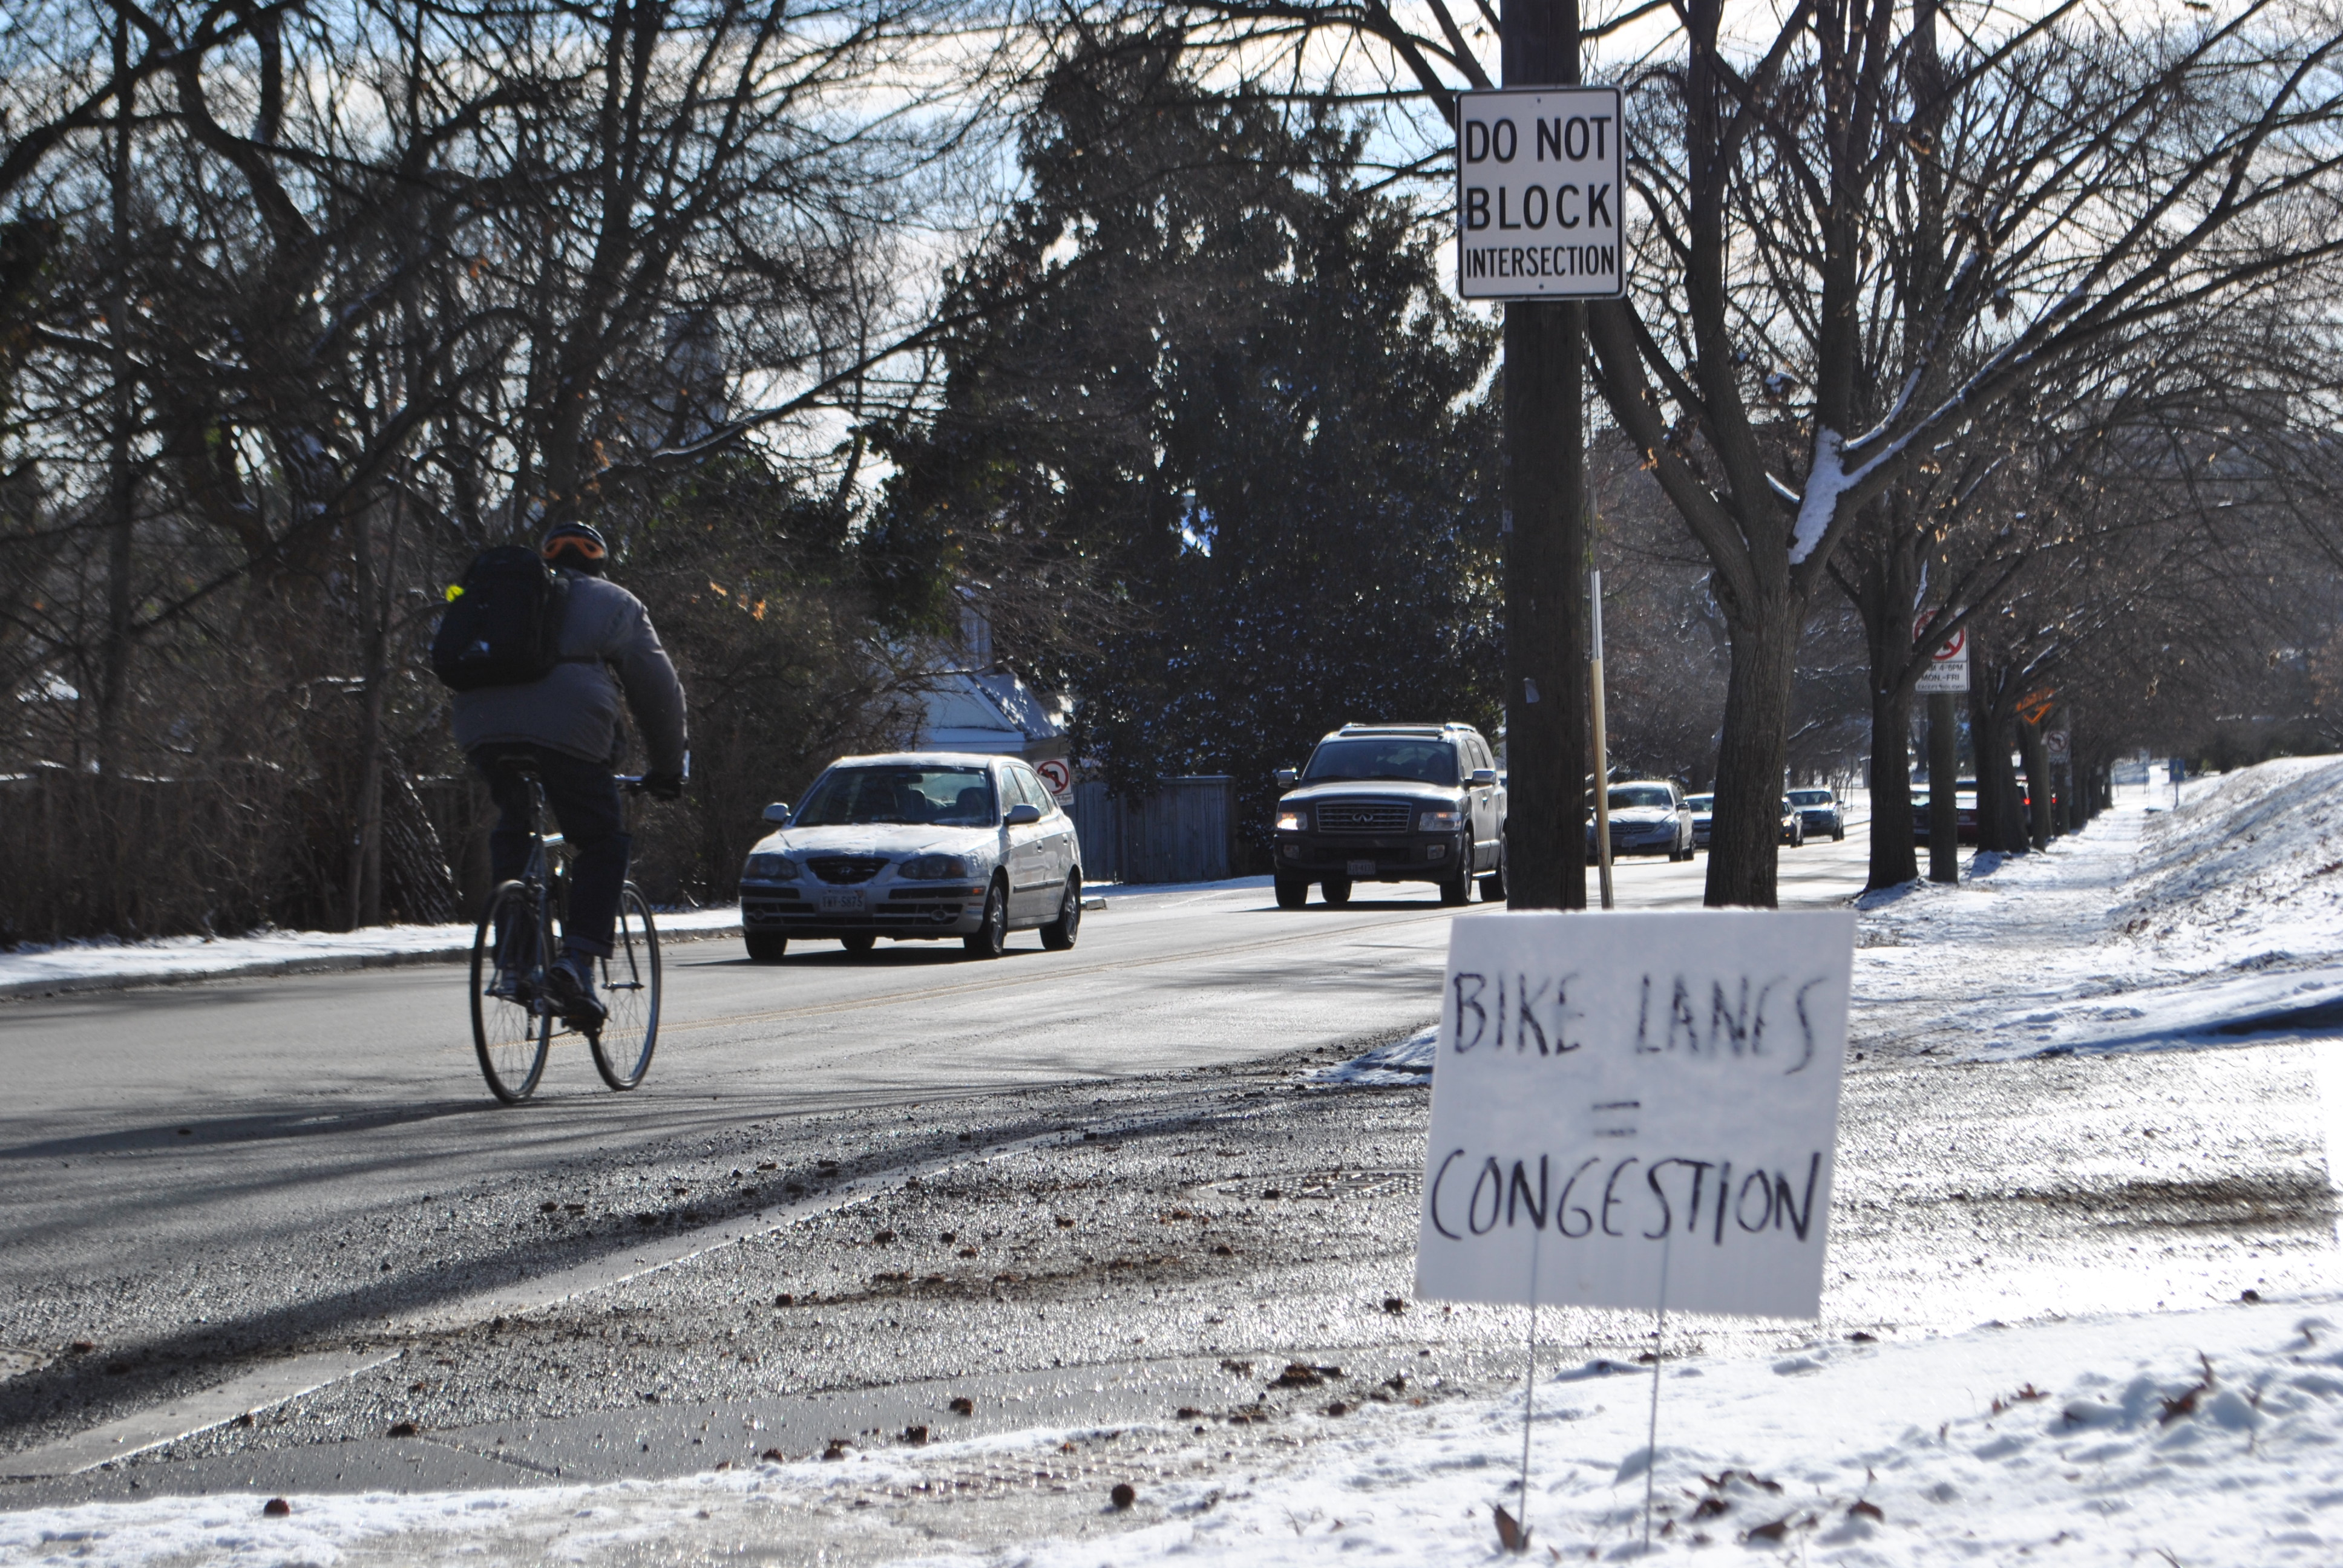 Until cyclists change irksome traffic laws, they must follow them